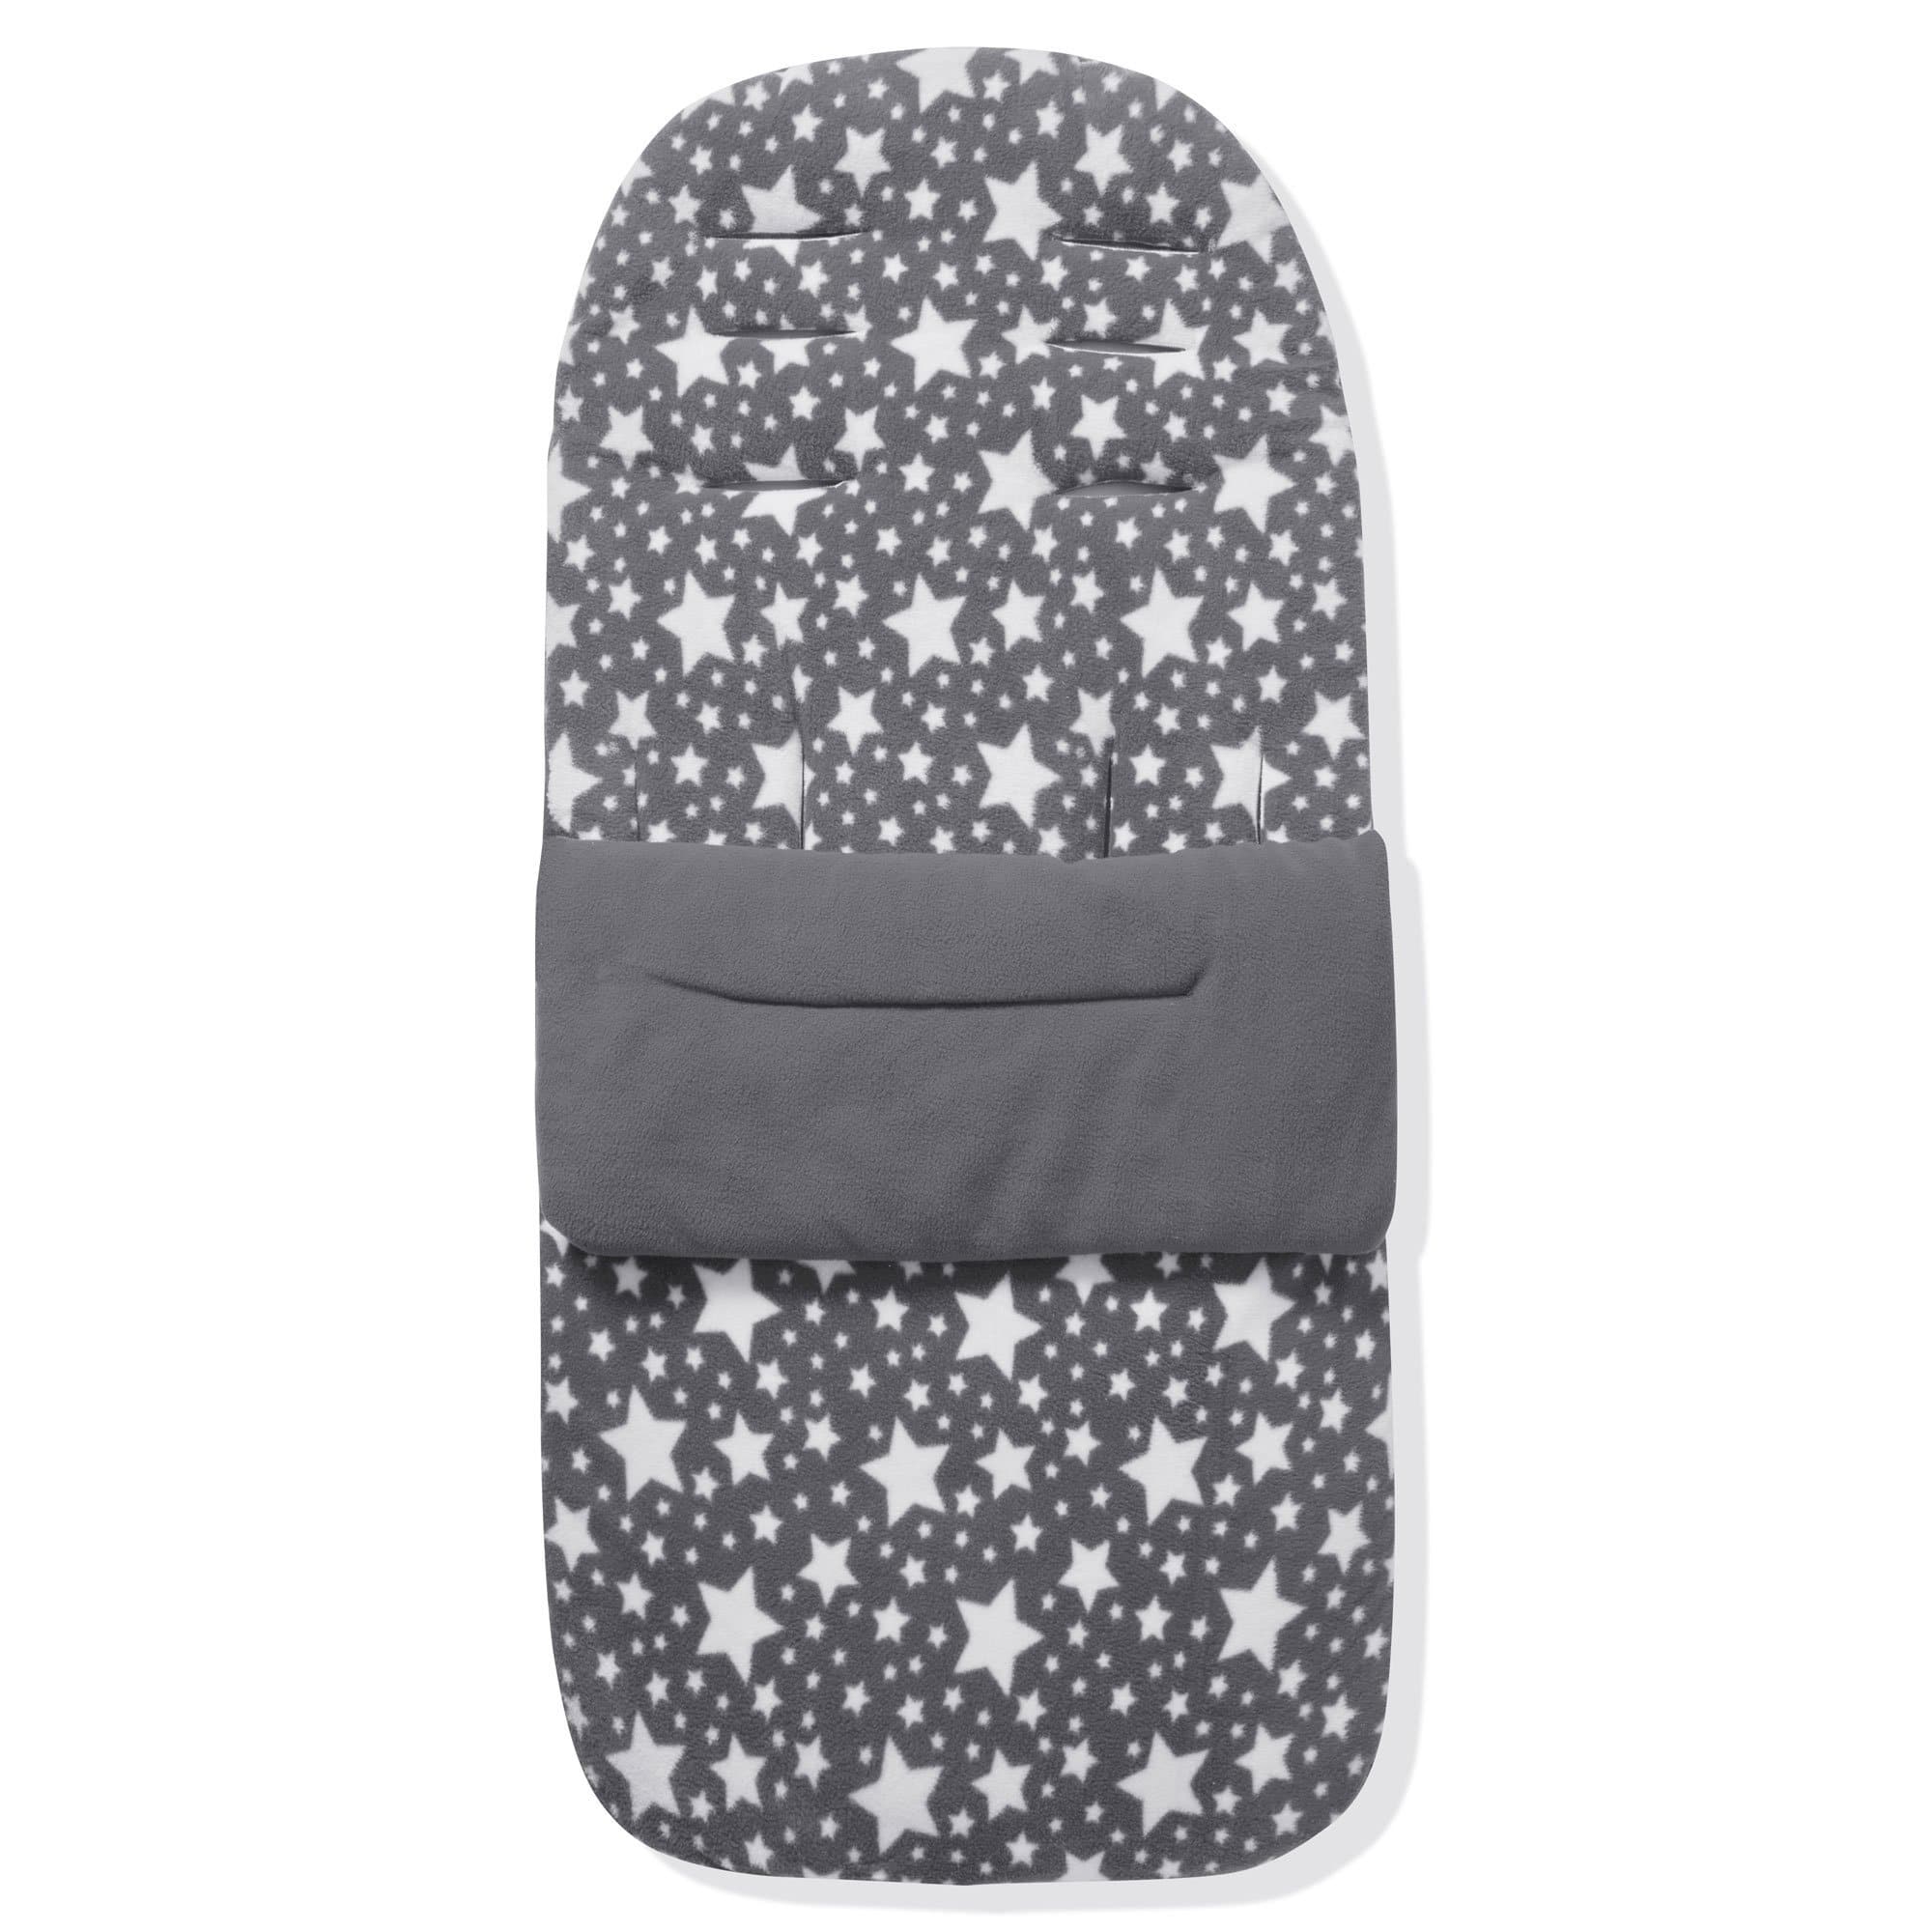 Fleece Footmuff / Cosy Toes Compatible With Baby Jogger - Grey Star / Fits All Models | For Your Little One